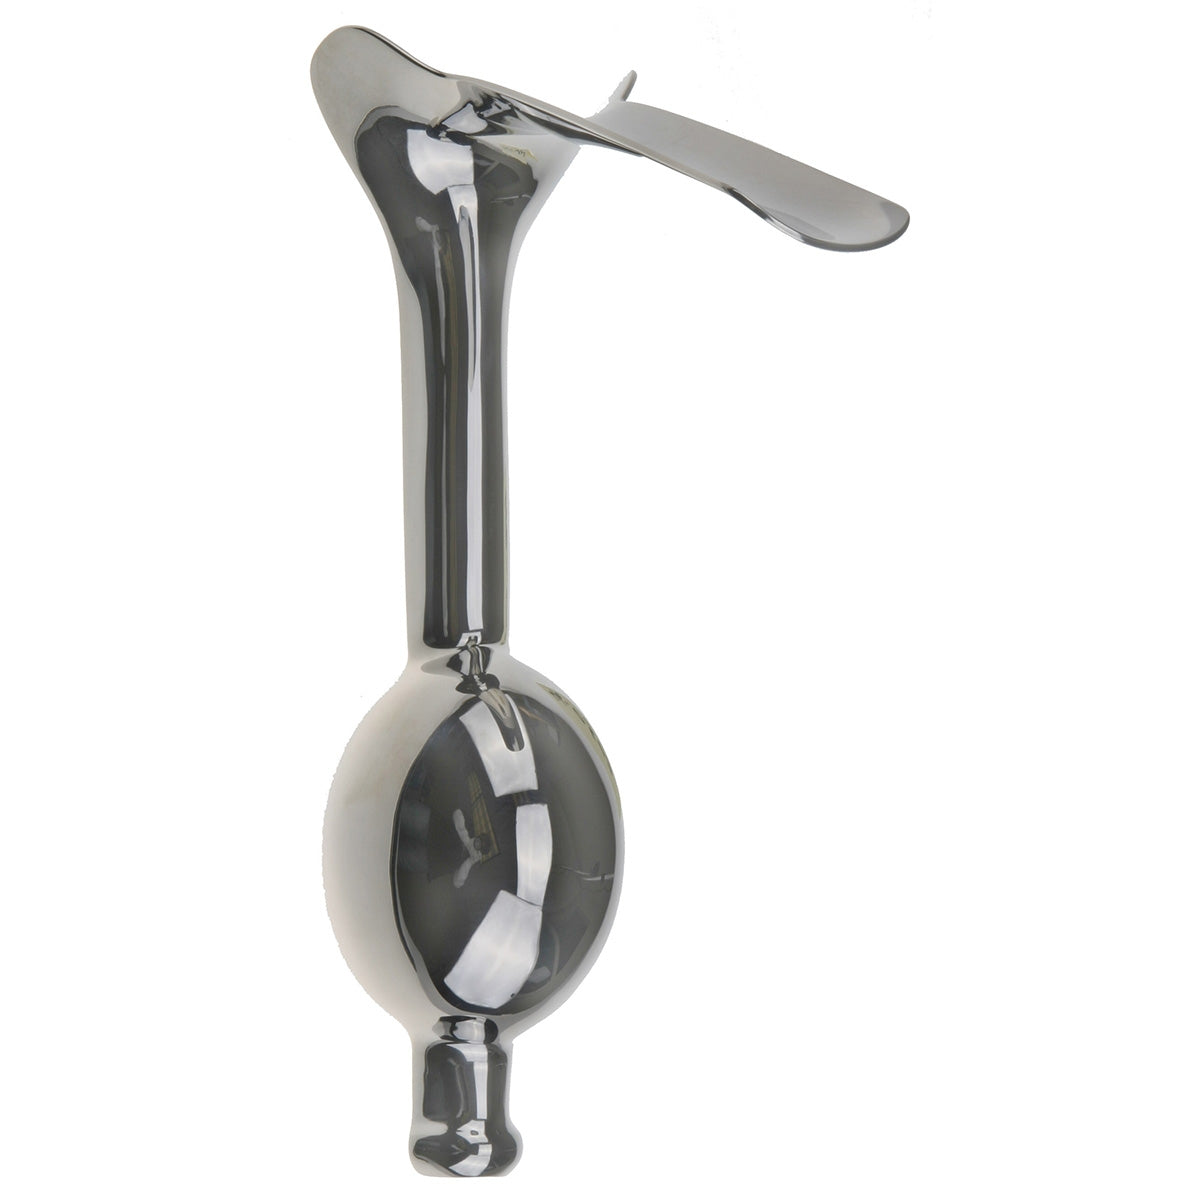 Auvard Speculum, 4 x 1 3/4 inches, 2 1/2 pounds